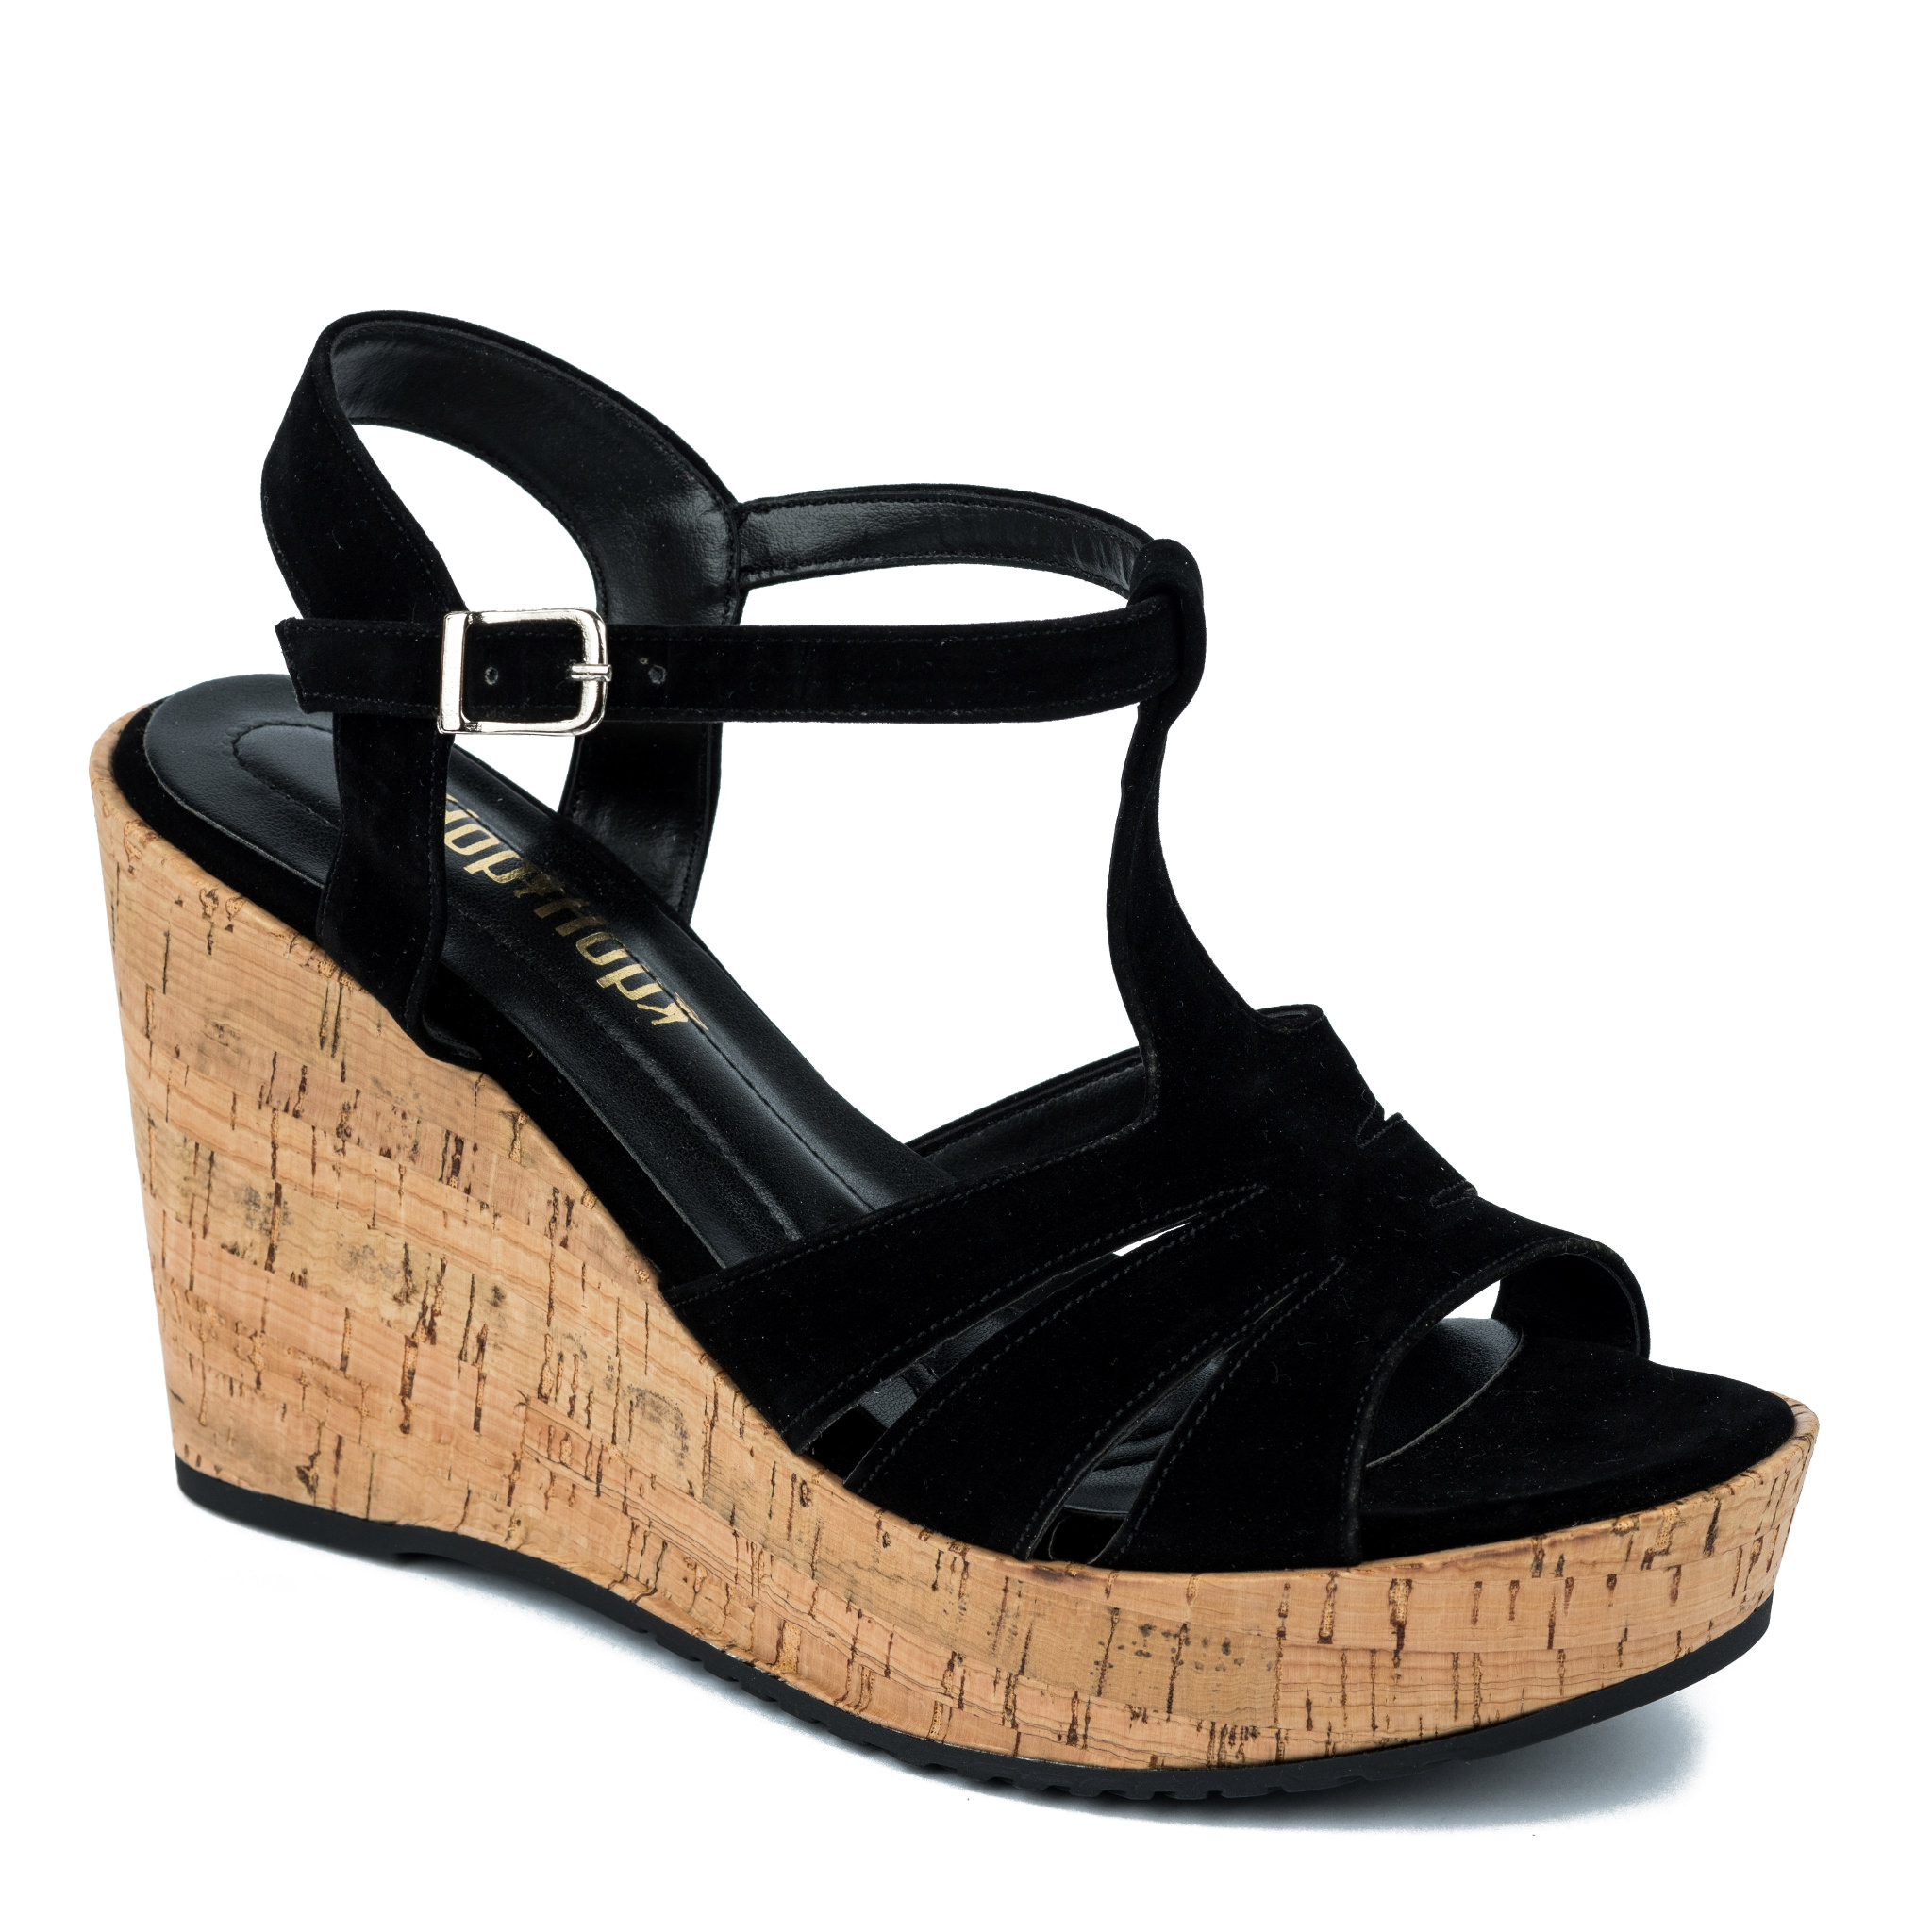 PLUSH WEDGE SANDALS WITH BELTS - BLACK